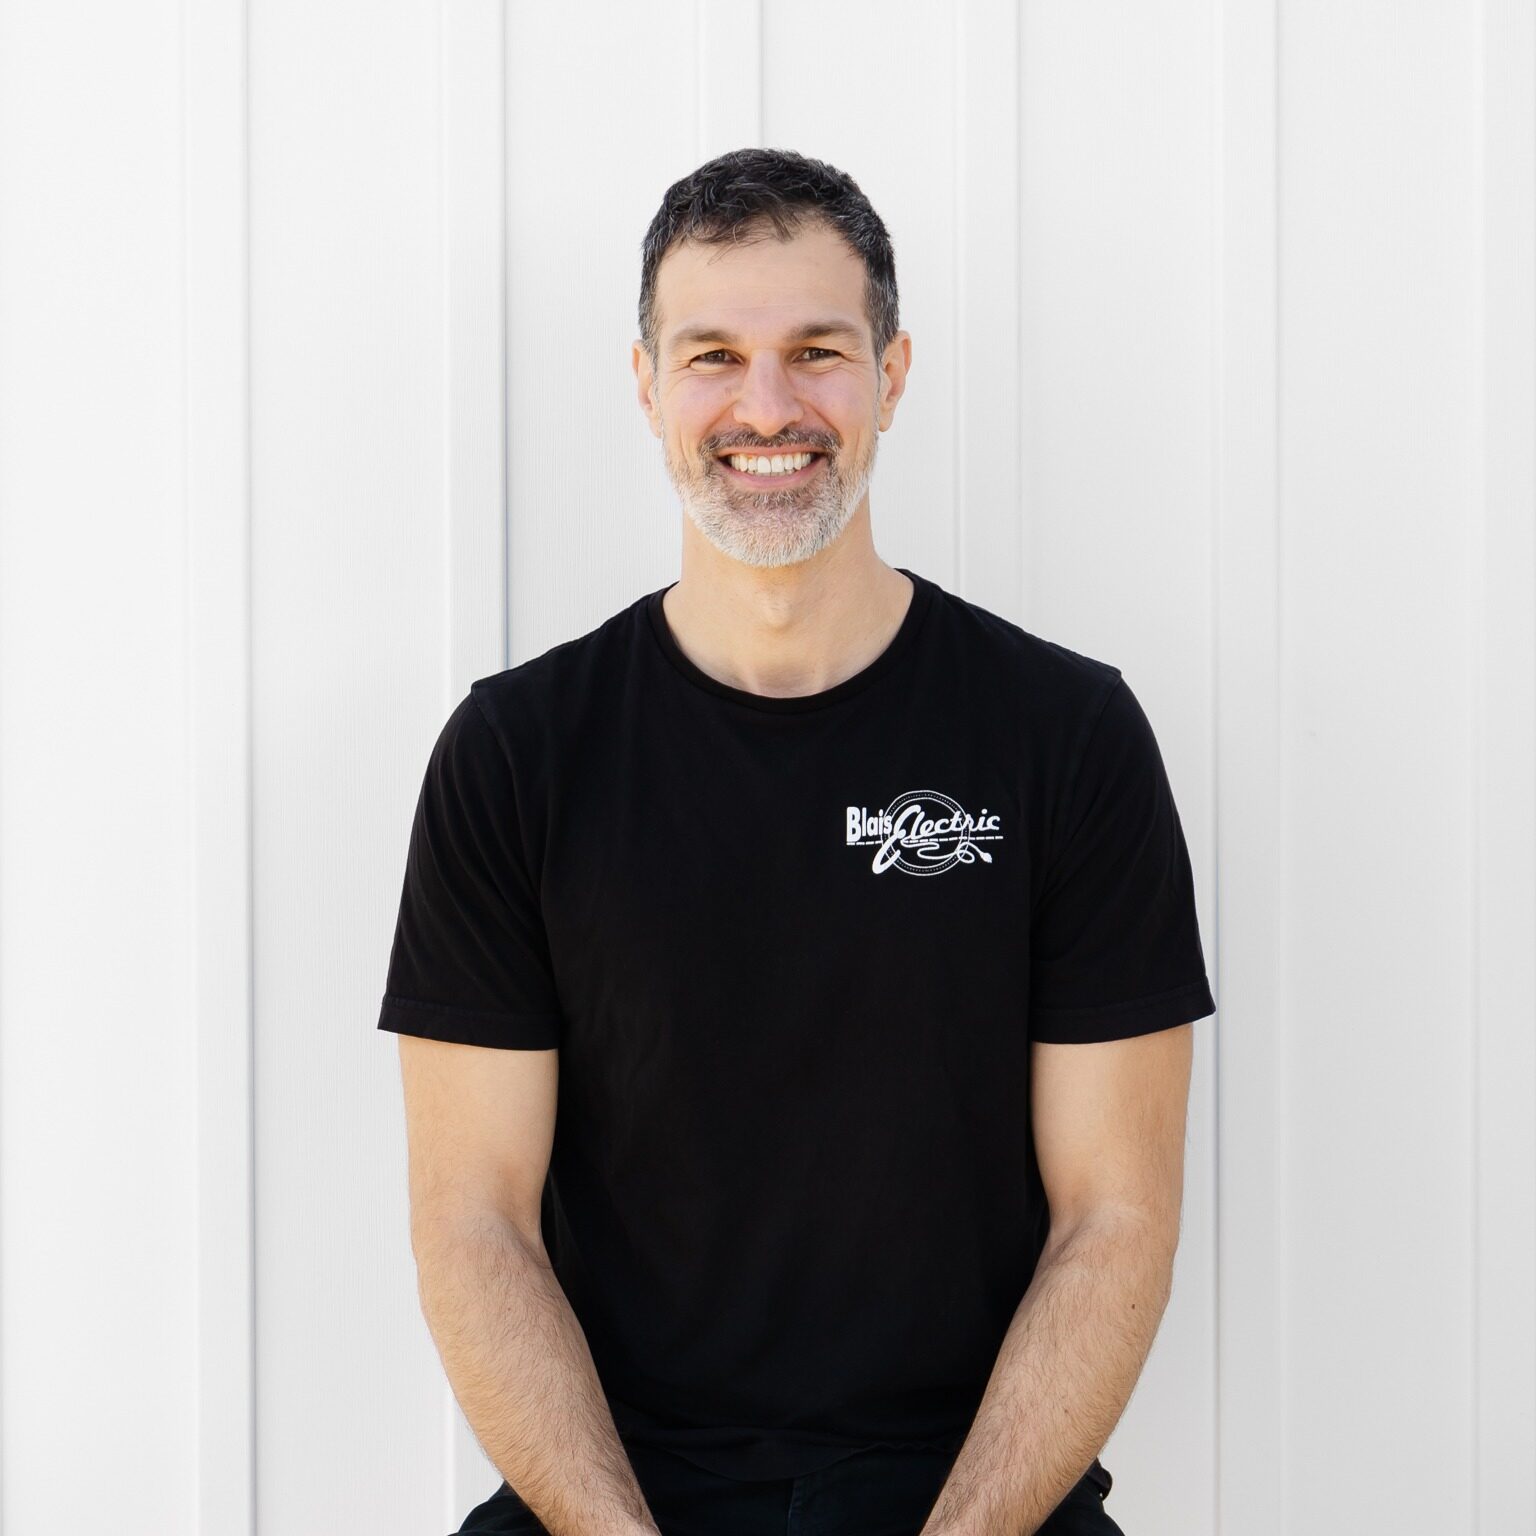 A person with a beard smiling, wearing a black t-shirt, standing against a white vertical plank background, looking relaxed and happy.